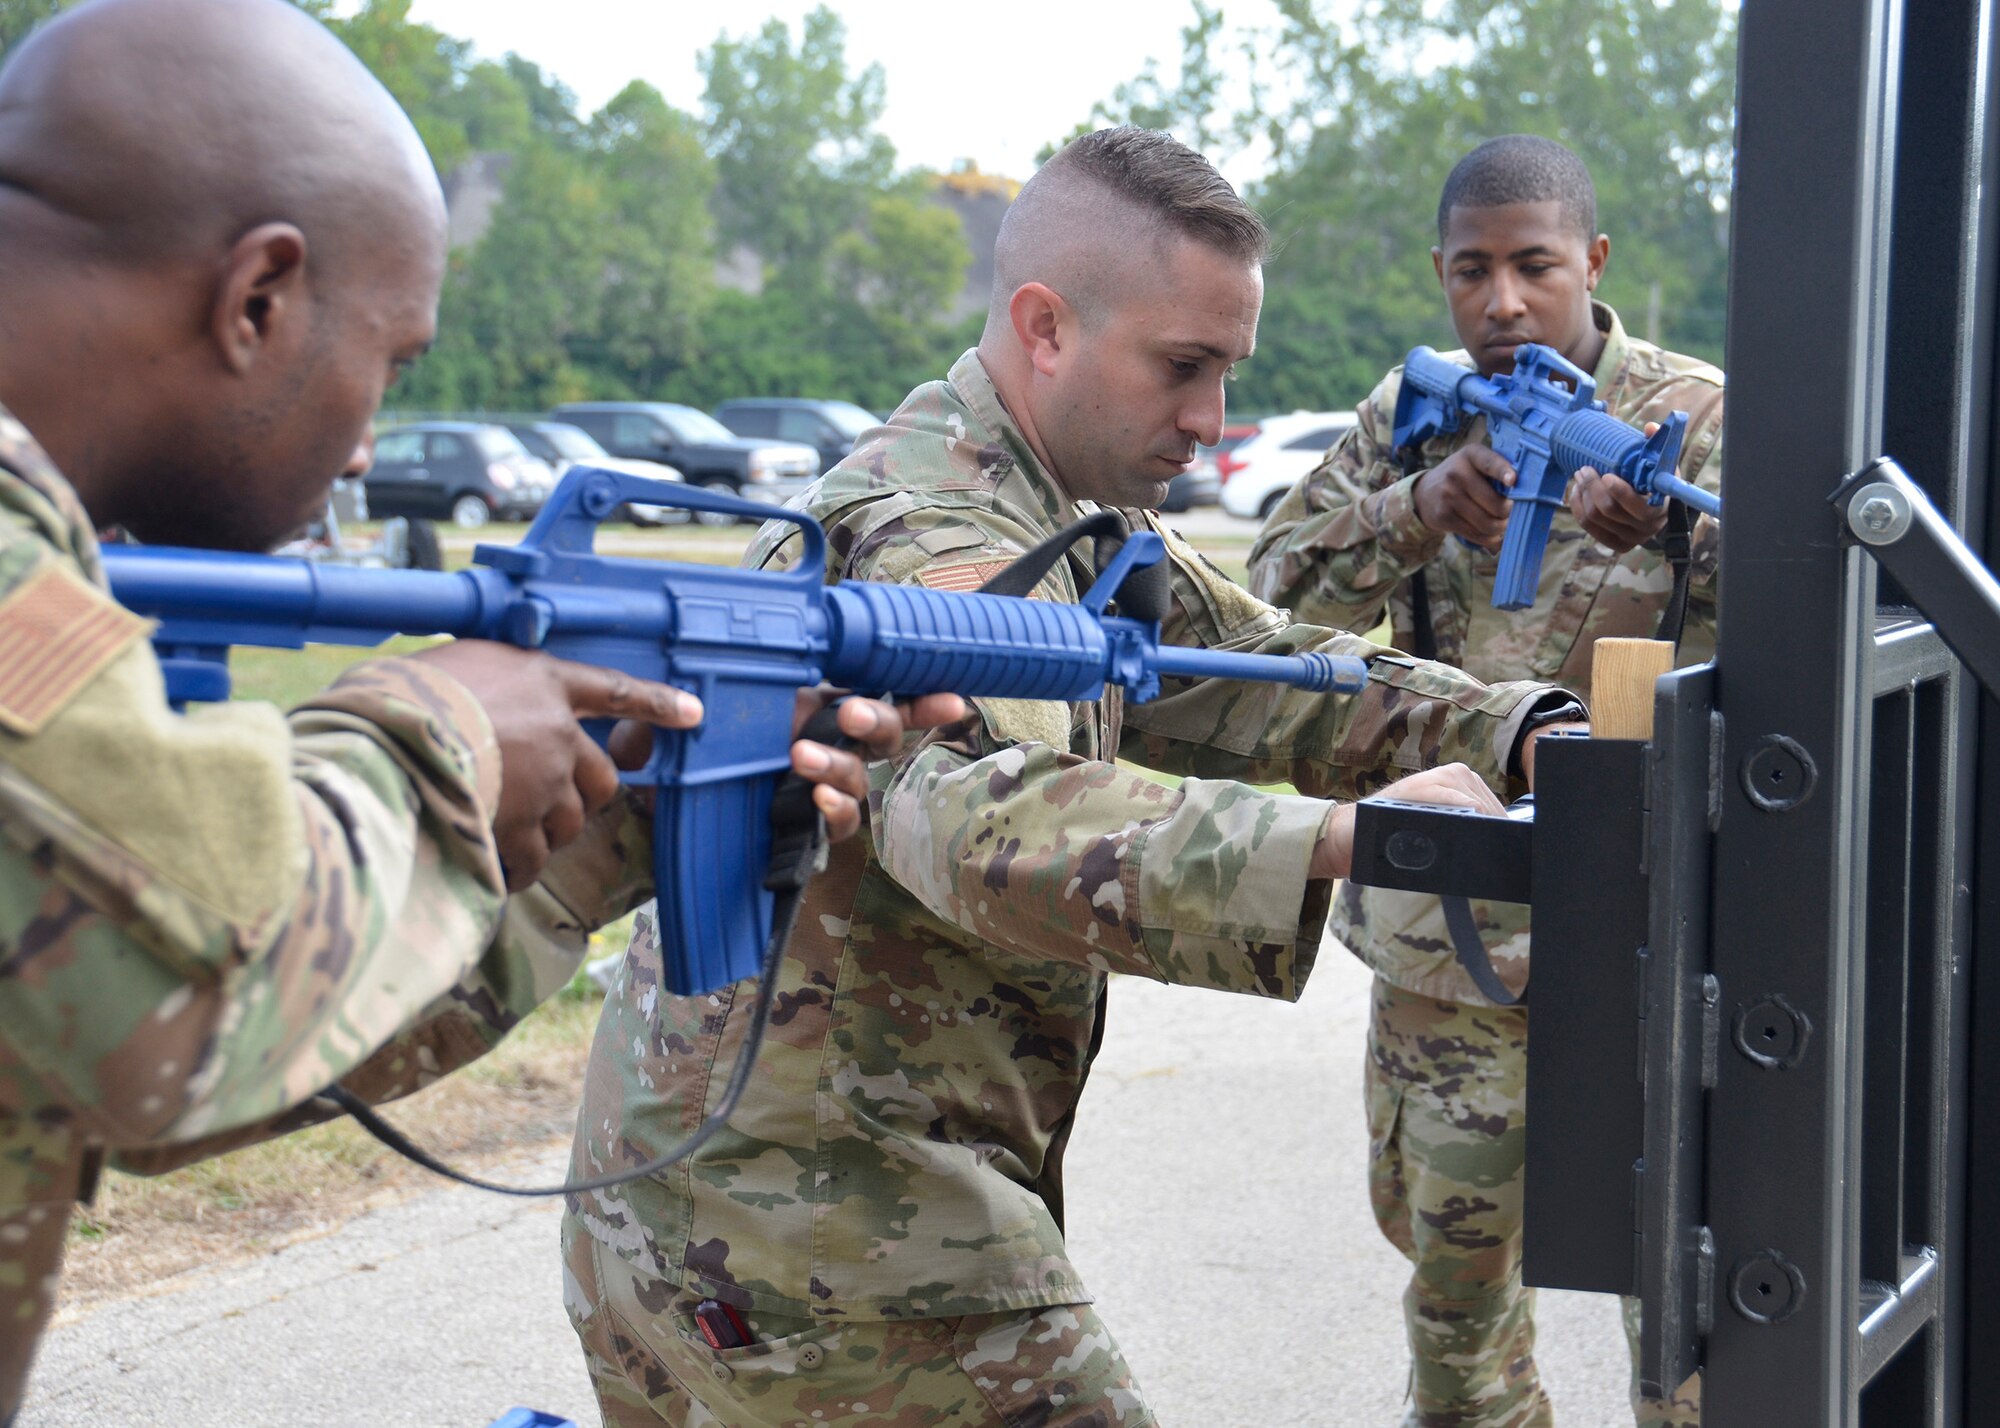 Staff Sgt. Chris Bell, fire team member, Tech. Sgt. Nathan Ellcessor, fire team leader, and Senior Airman Daryn Weatherspoon, fire team member, all with the 445th Security Forces Squadron, demonstrate the proper way to use a tool called a hooligan to force open a locked door September 8, 2019. The demonstration was part of a door-breaching training which included about 30 Airmen and offered hands-on practice with multiple specialized tools. (U.S. Air Force photo/1st Lt. Rachel Ingram)